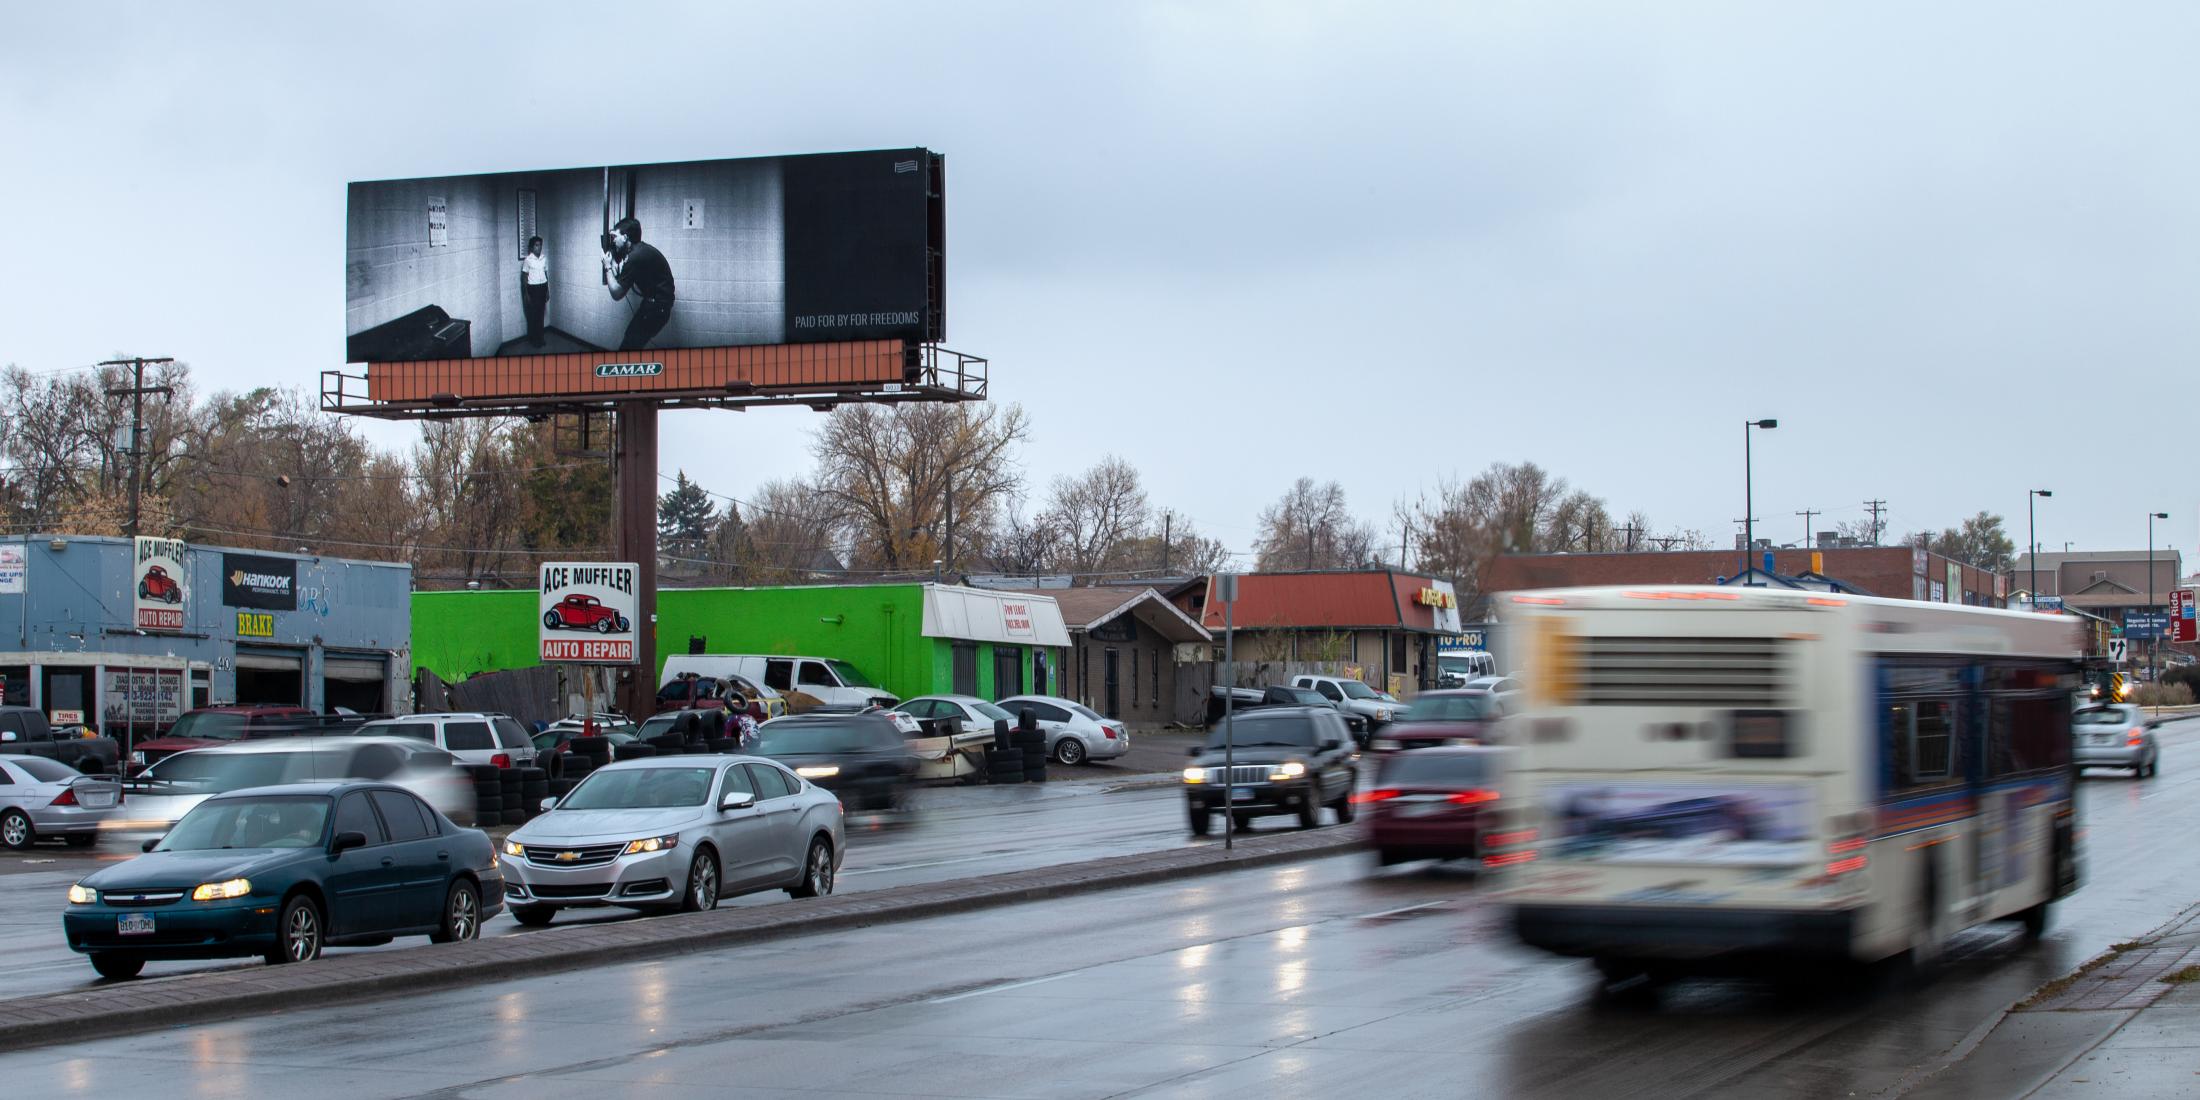 United States/Mexico Border Billboard - For Freedoms billboard installed on Federal Blvd in...